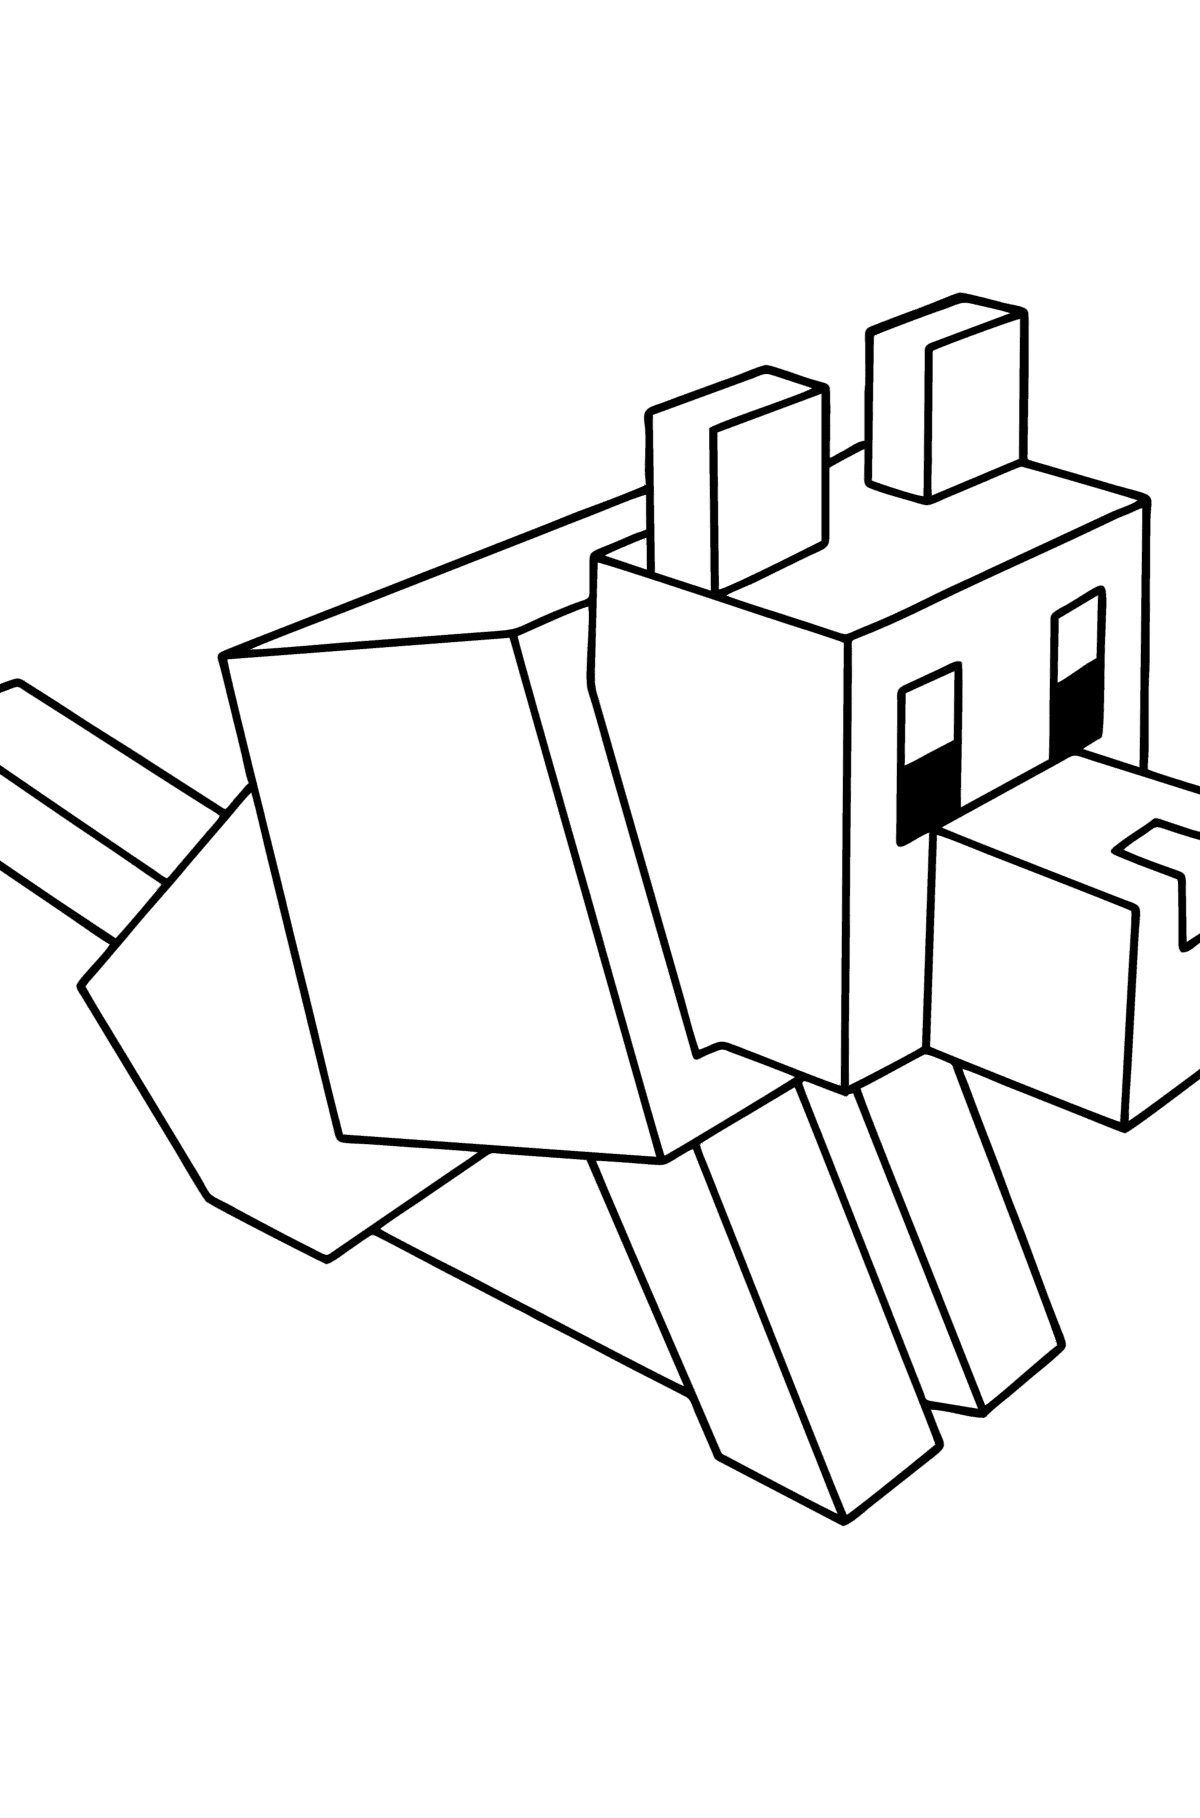 Minecraft Wolf coloring page - Coloring Pages for Kids